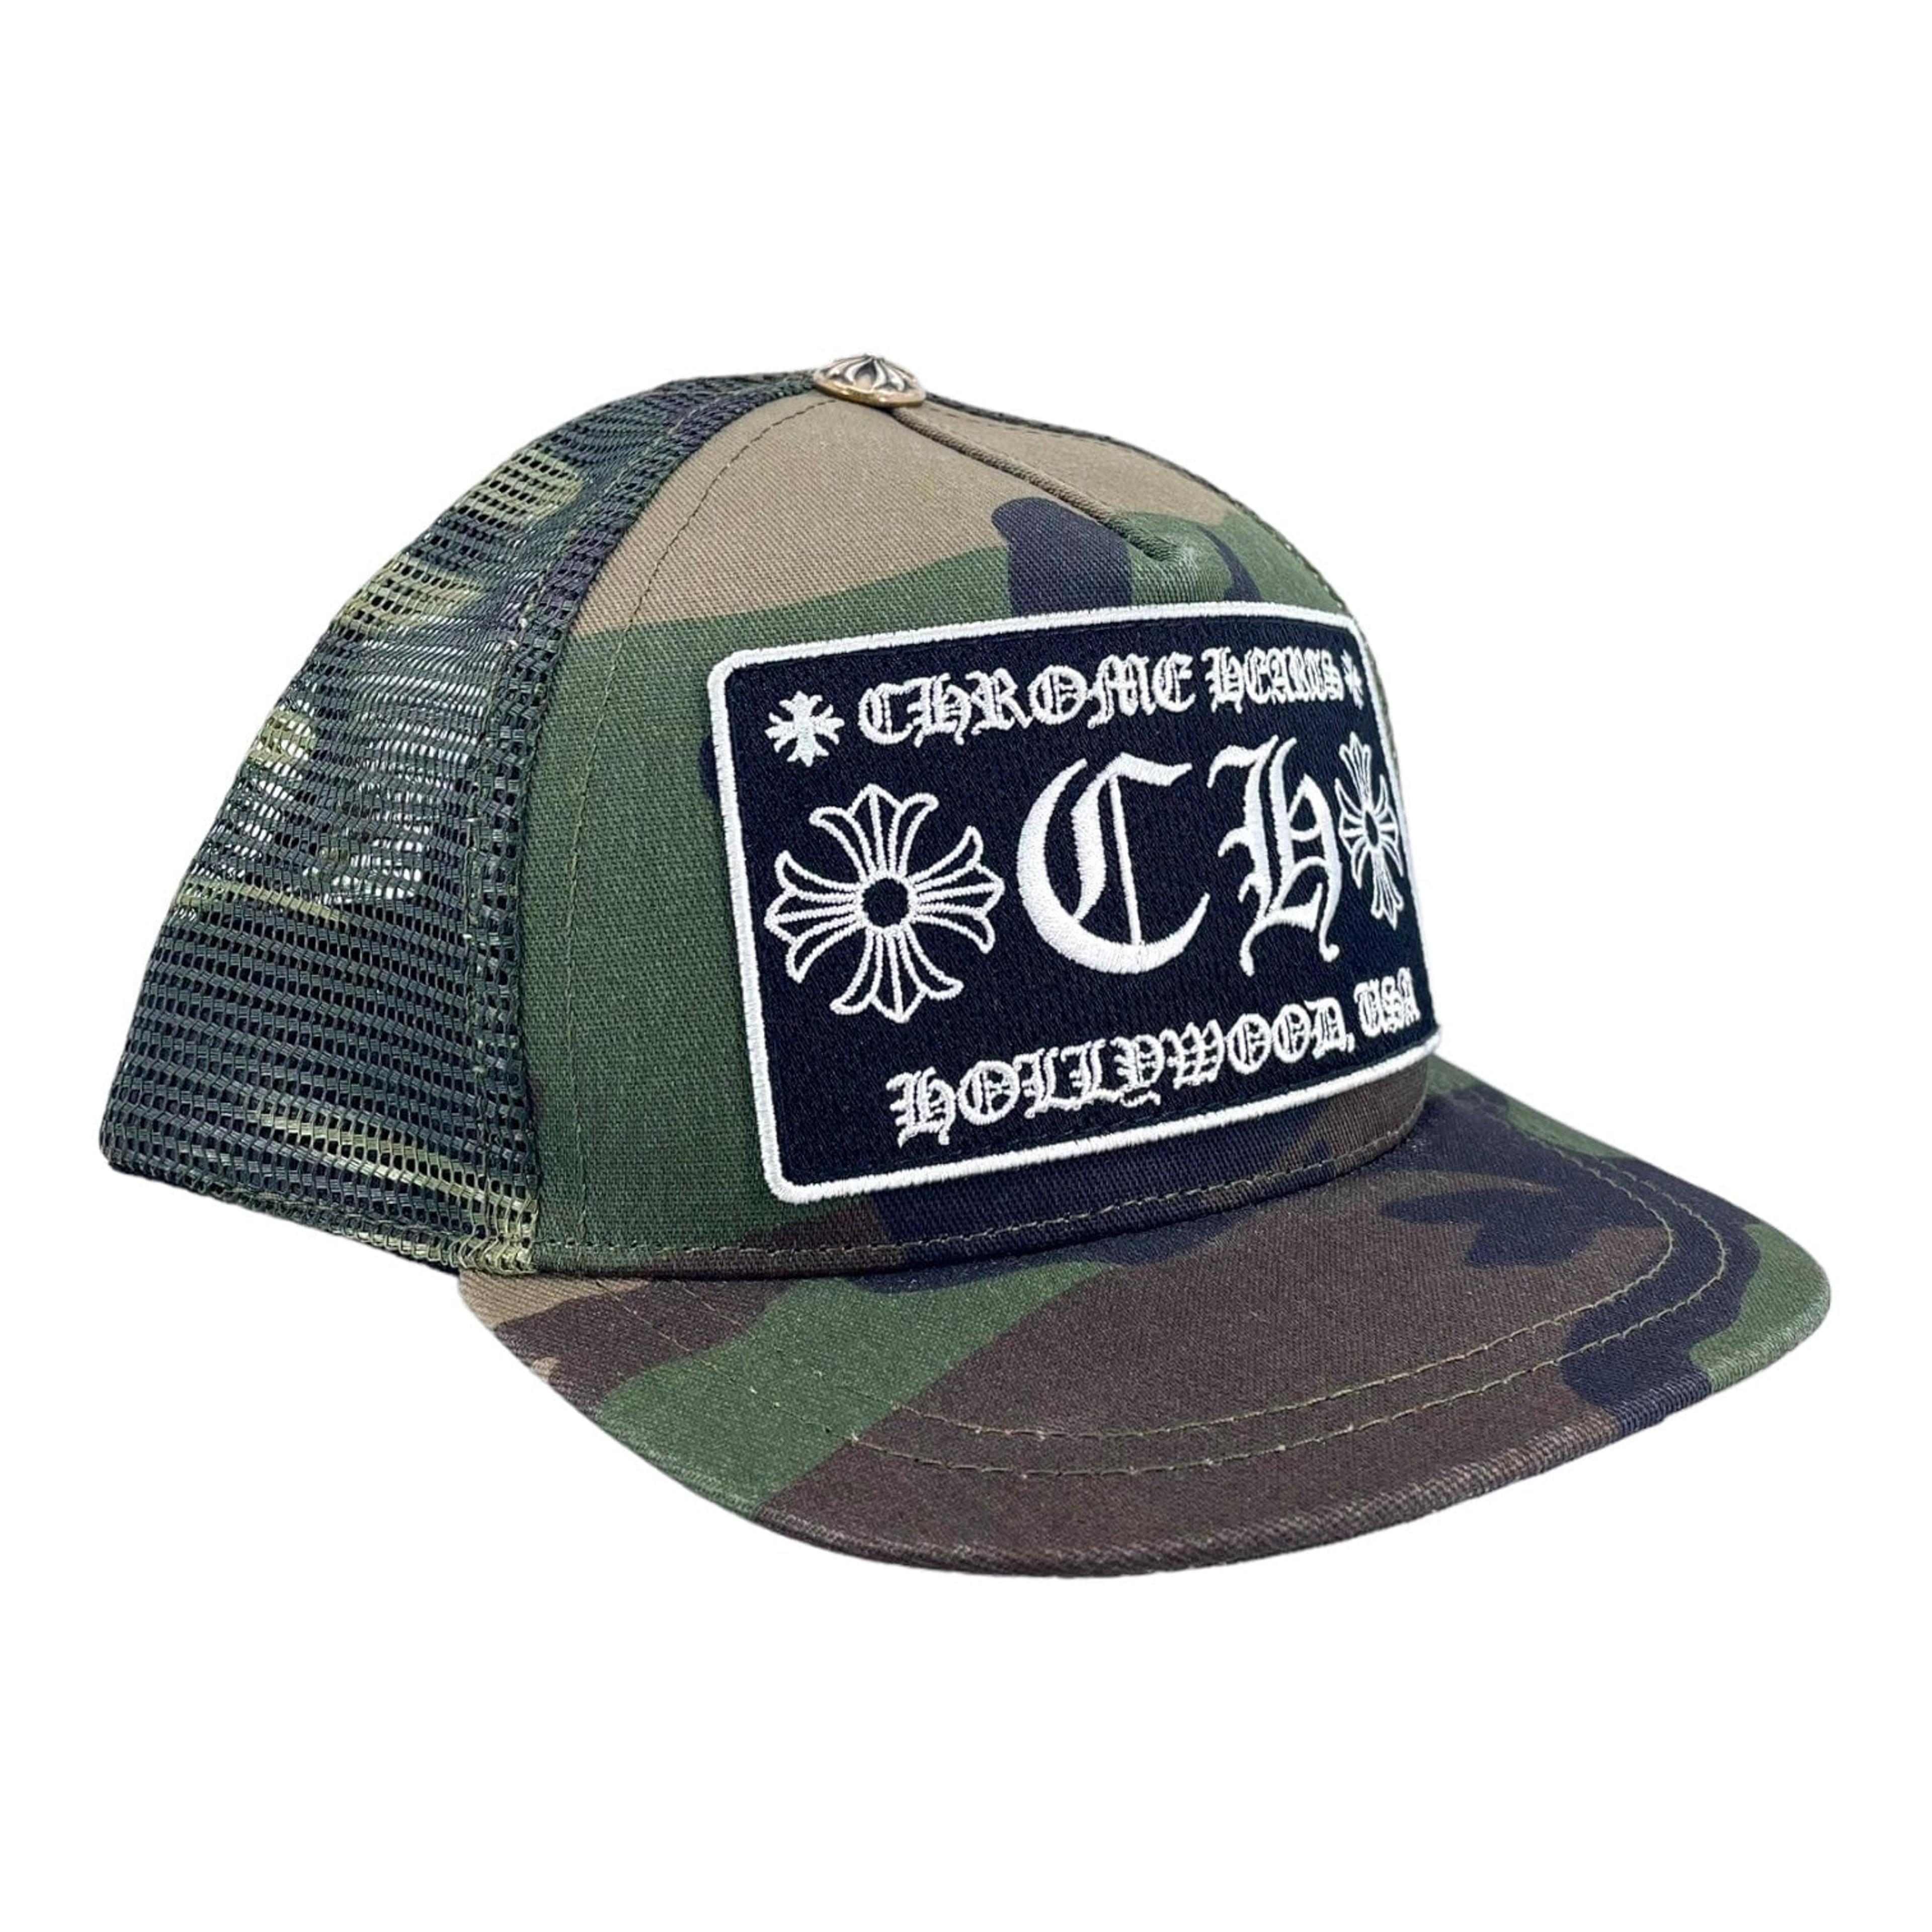 Alternate View 1 of Chrome Hearts CH Hollywood Trucker Hat Camo